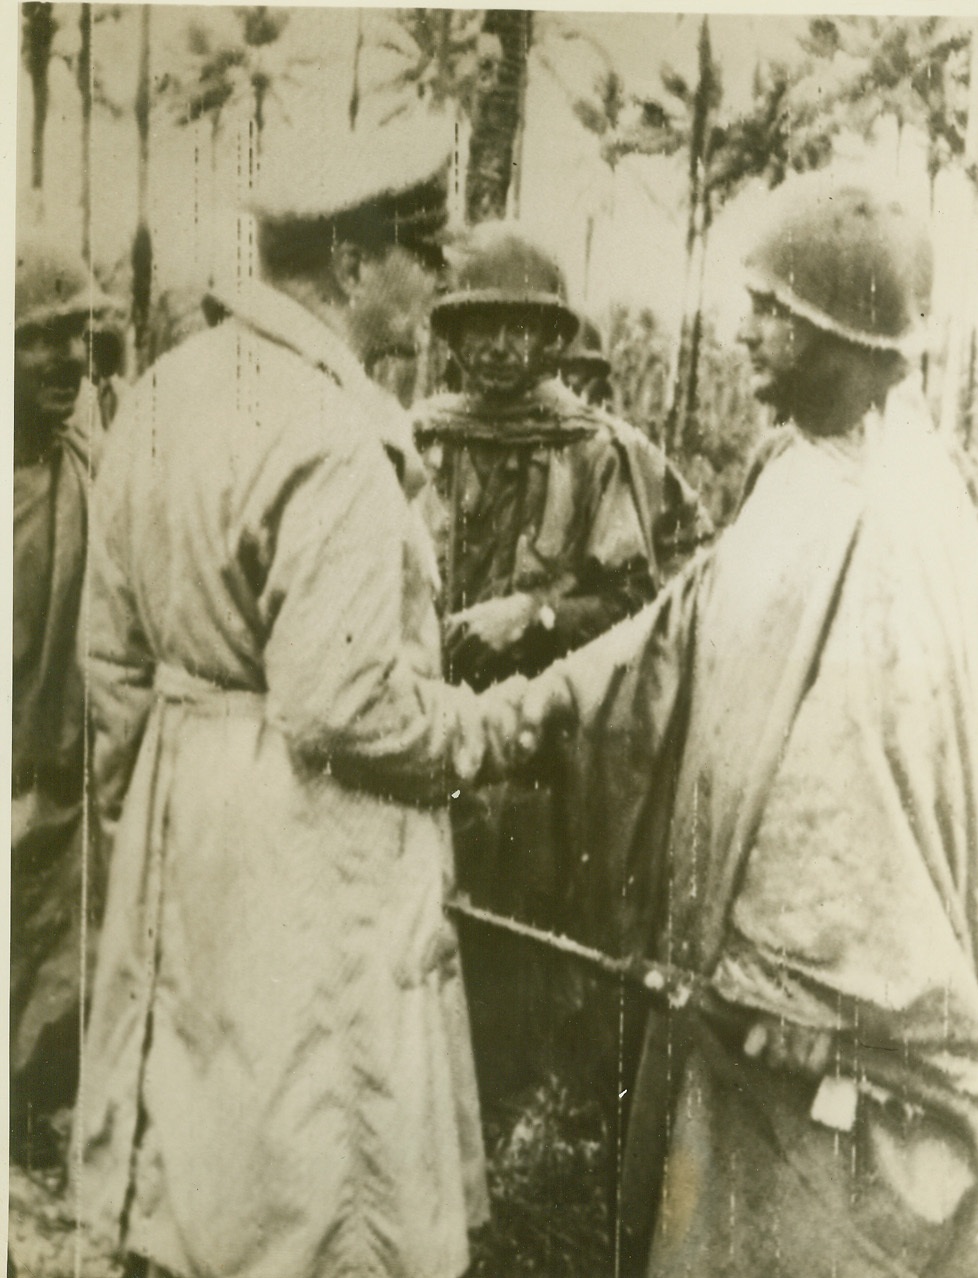 MacArthur Congratulates First Admiralty Lander, 3/2/1944. Los Negros, A.I.—Landing from destroyers Tuesday, Feb. 29th, elements of the U.S. 1st Cavalry Division captured Momote Airdrome on Los Negros Island in the Admiralties. General Douglas Macarthur (L) shakes hands with 1st Lt. Frank Henshaw of Alice, Texas, first man to land on the island, a feat for which he was awarded the D.S.C. Enemy resistance is being rapidly overcome and the operation proved to be extremely successful Macarthur said the action was started as a reconnaissance in force and became an invasion when the opportunity made itself available. Credit: Signal Corps radiotelephoto from ACME;